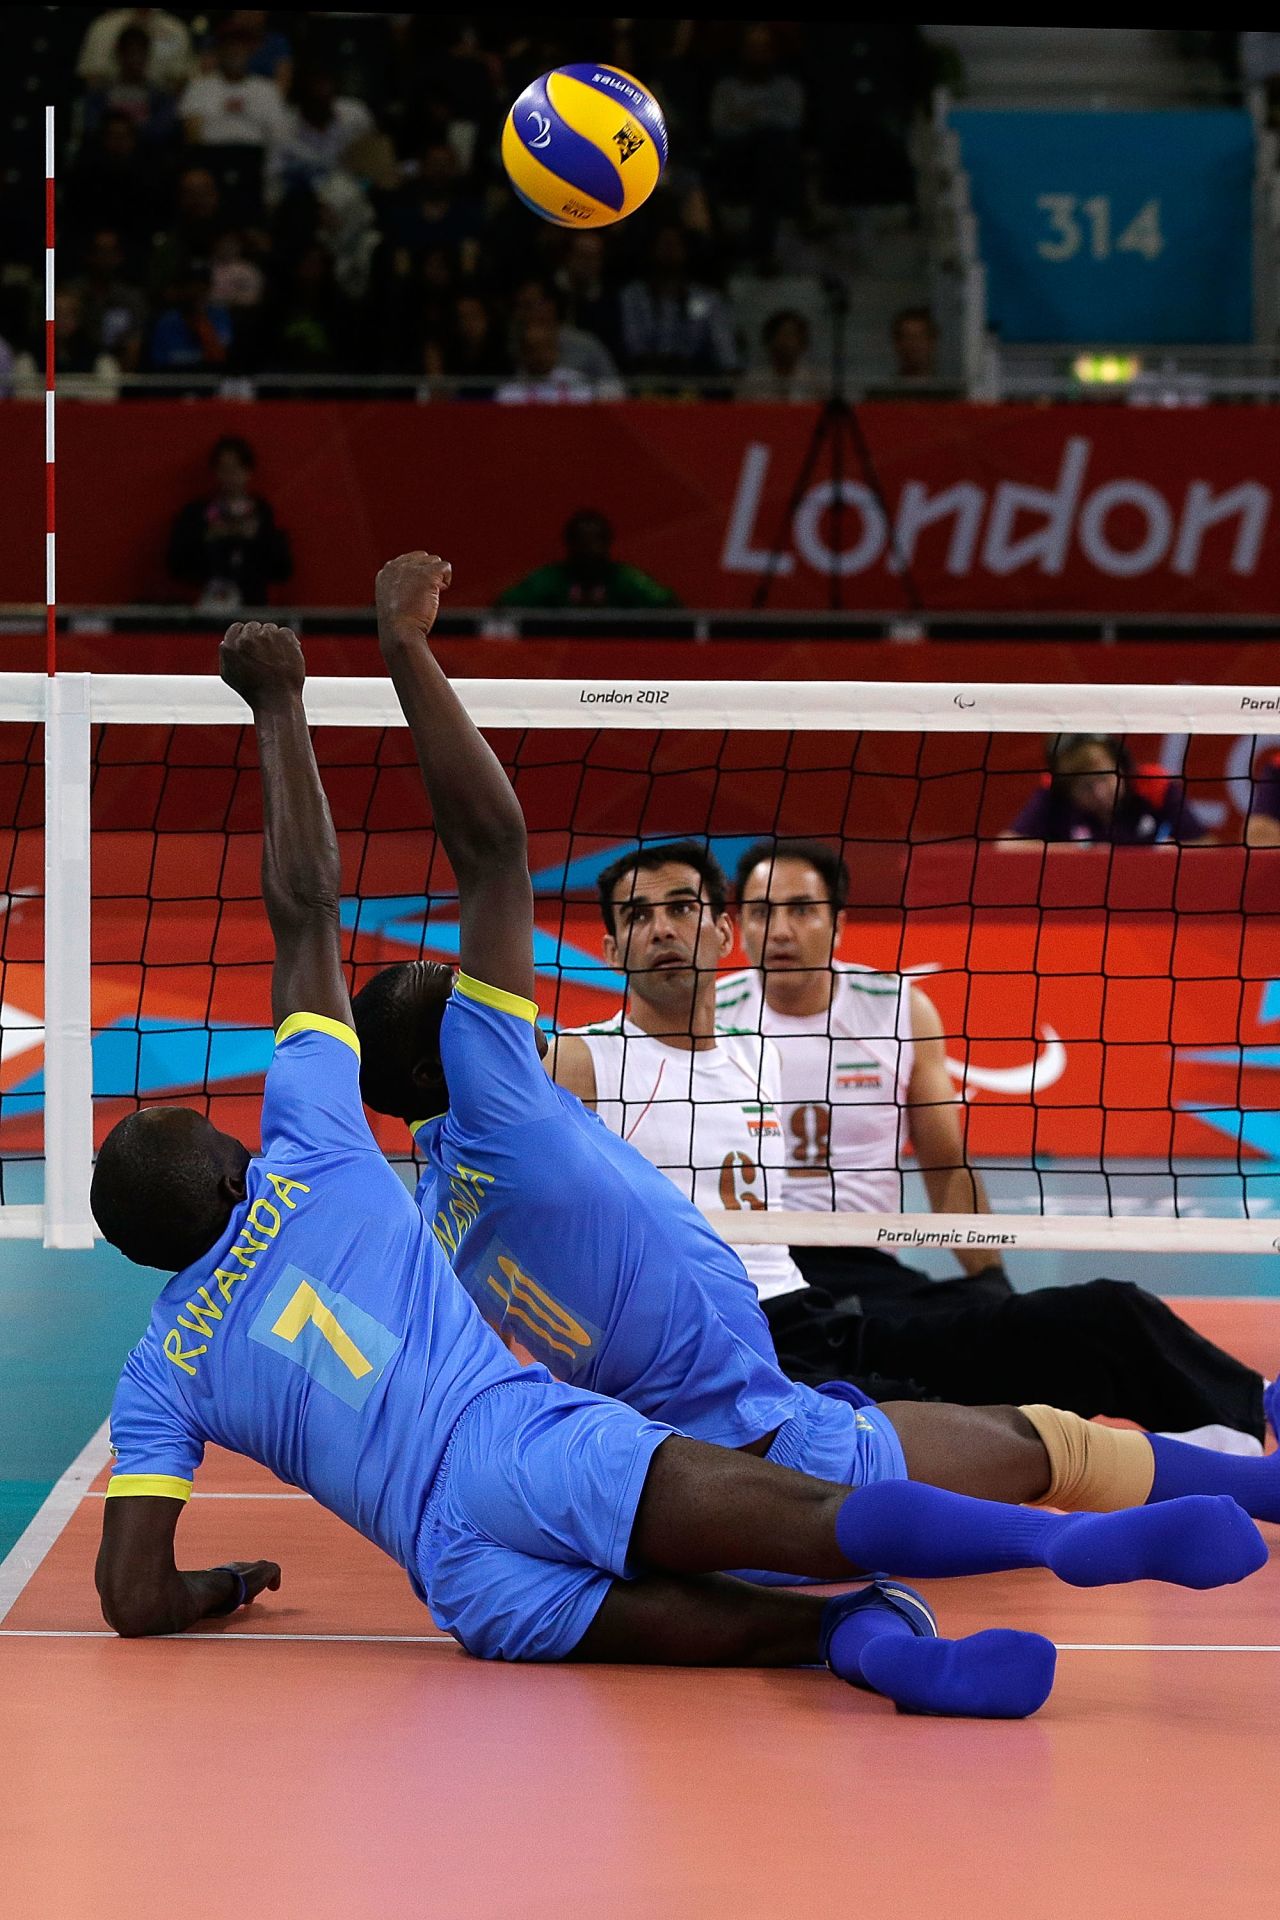 The Rwandans will also face Brazil, China and Bosnia-Herzegovina in Pool B. 